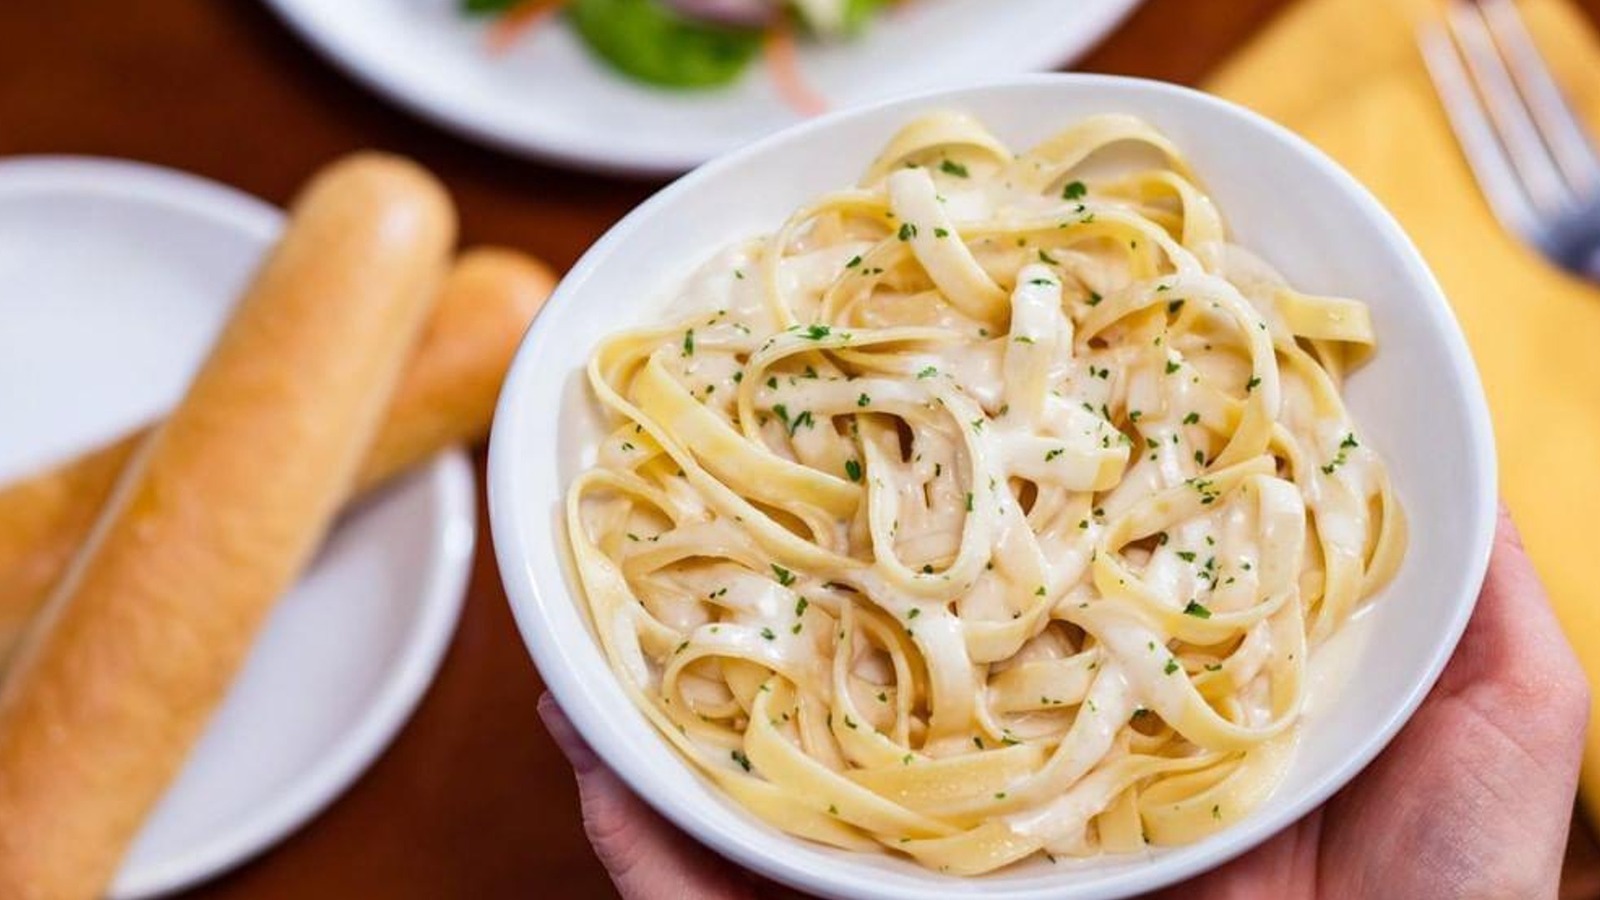 Why You Won’t Find Al Dente Pasta At Olive Garden – The Daily Meal